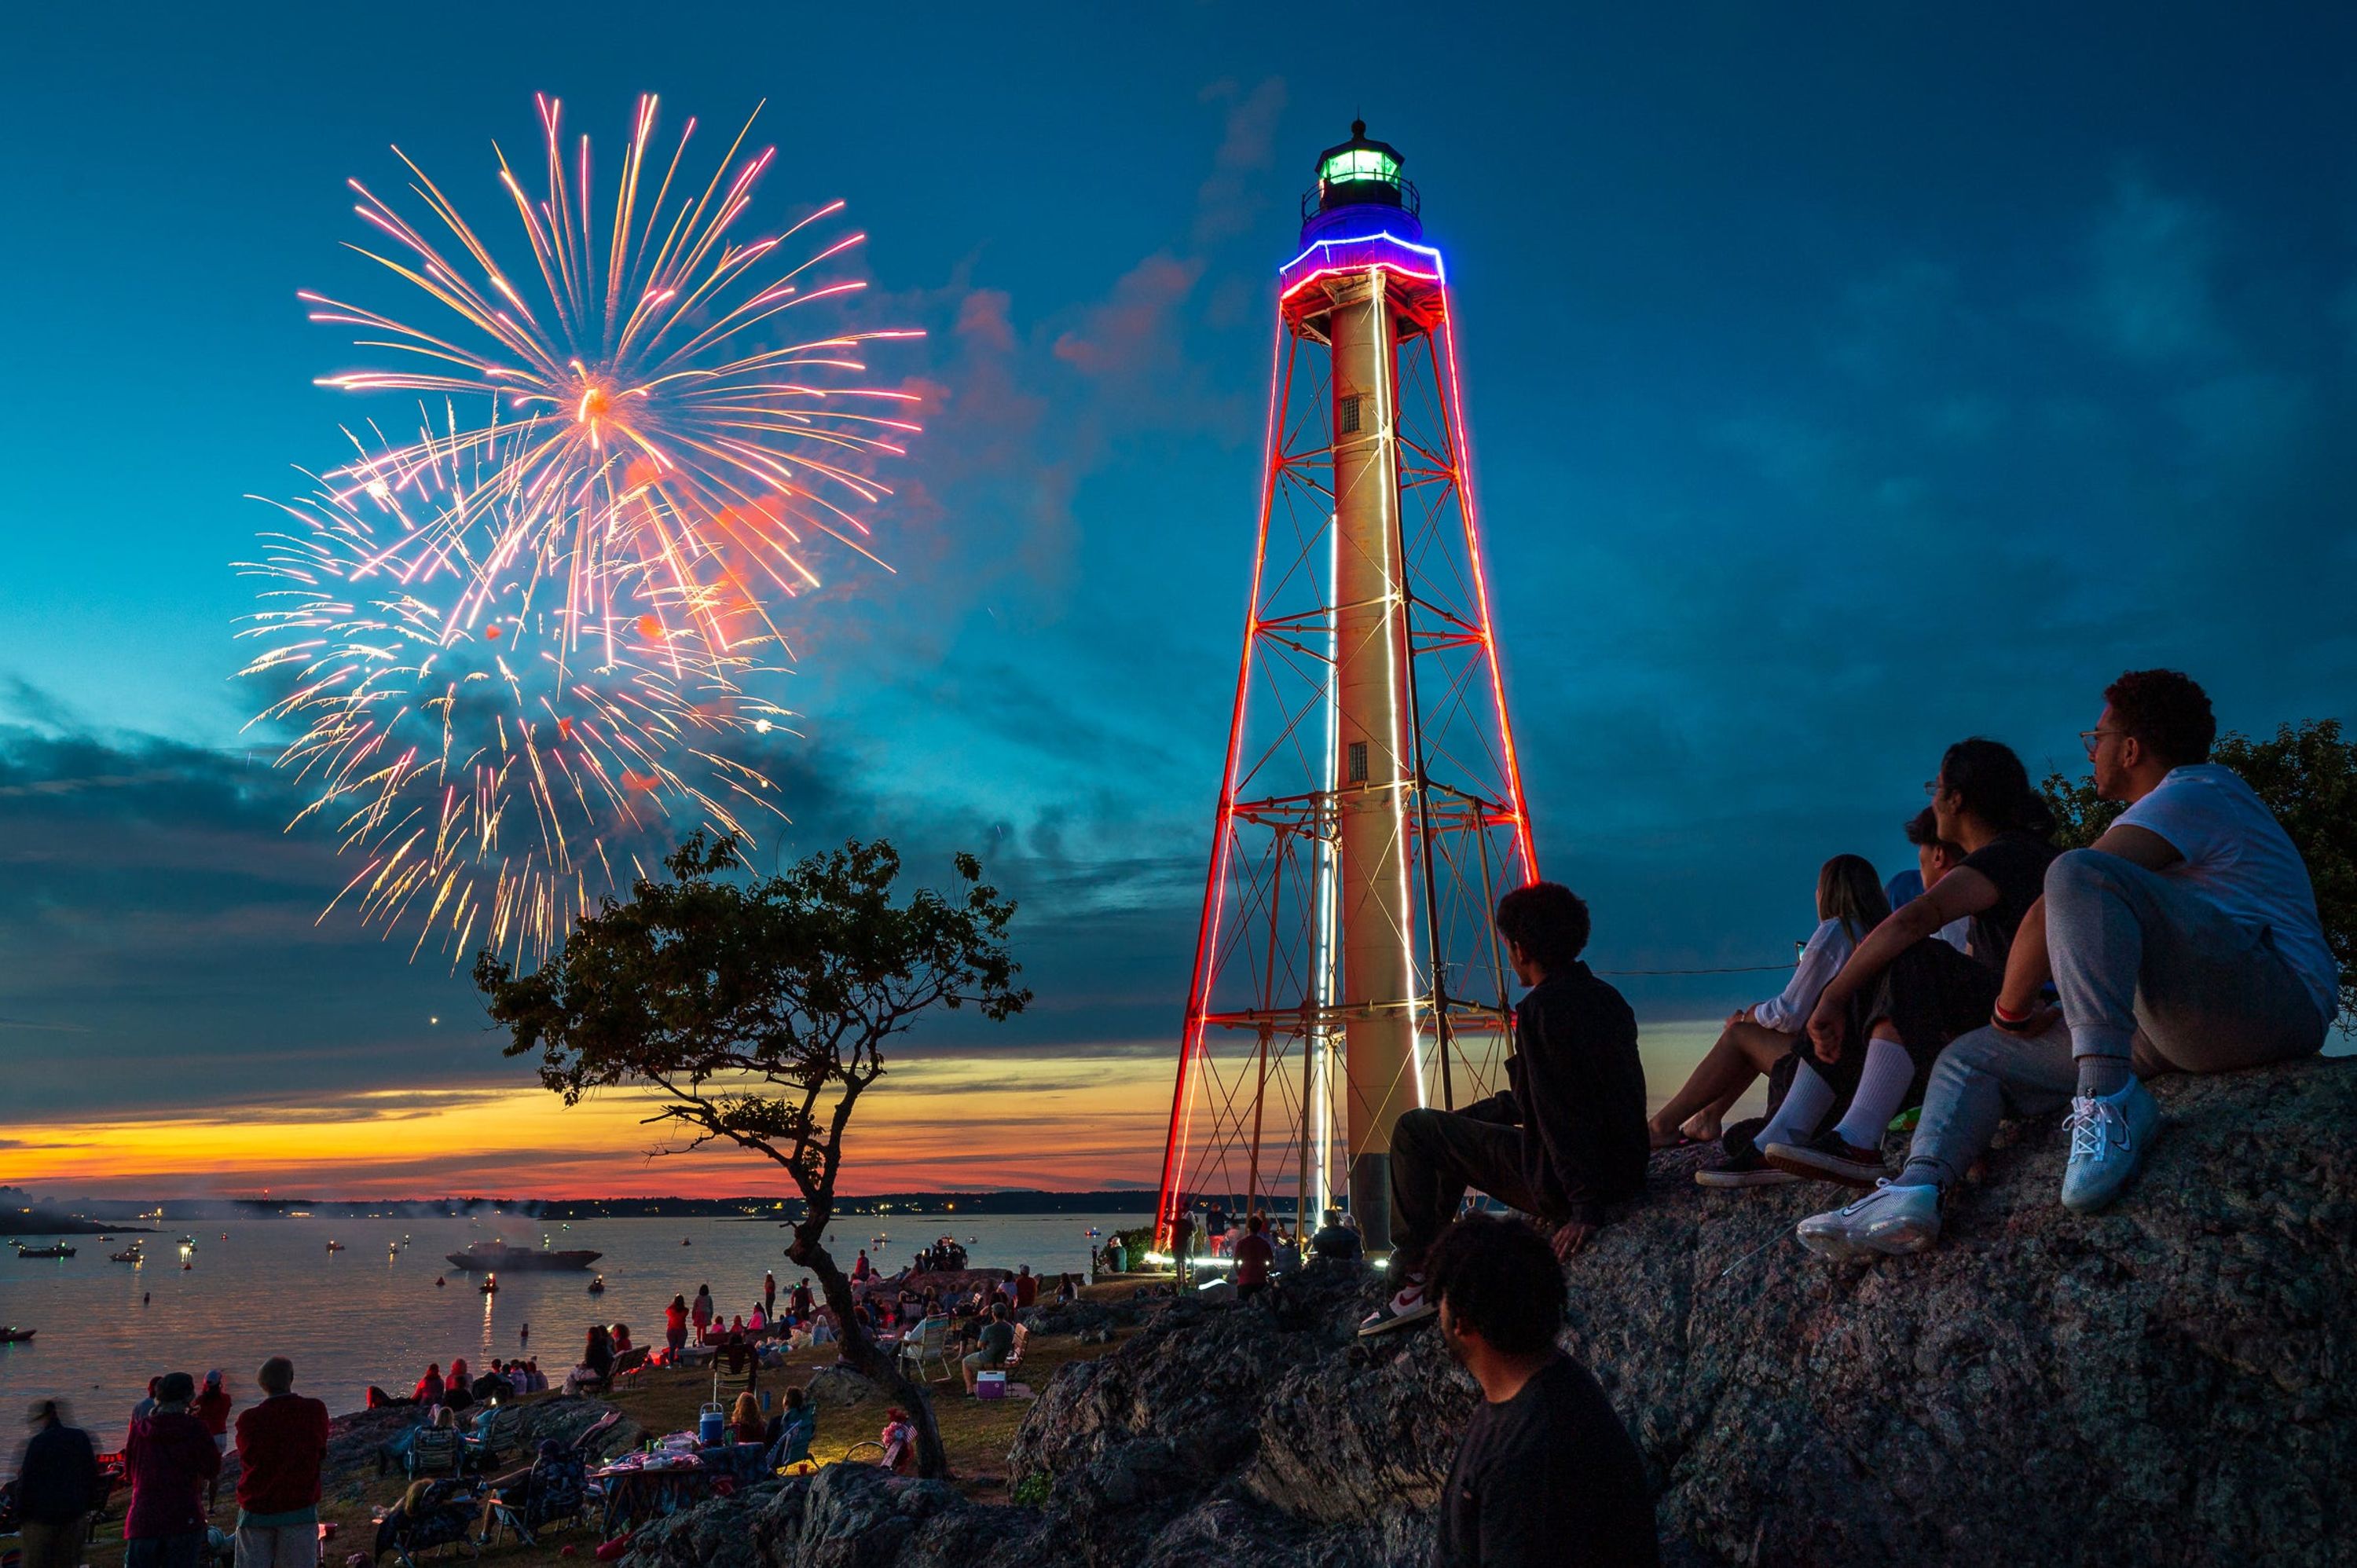 Community members gather at Chandler Hovey Park to watch the Fourth of July fireworks display Marblehead, Massachusetts, Monday.